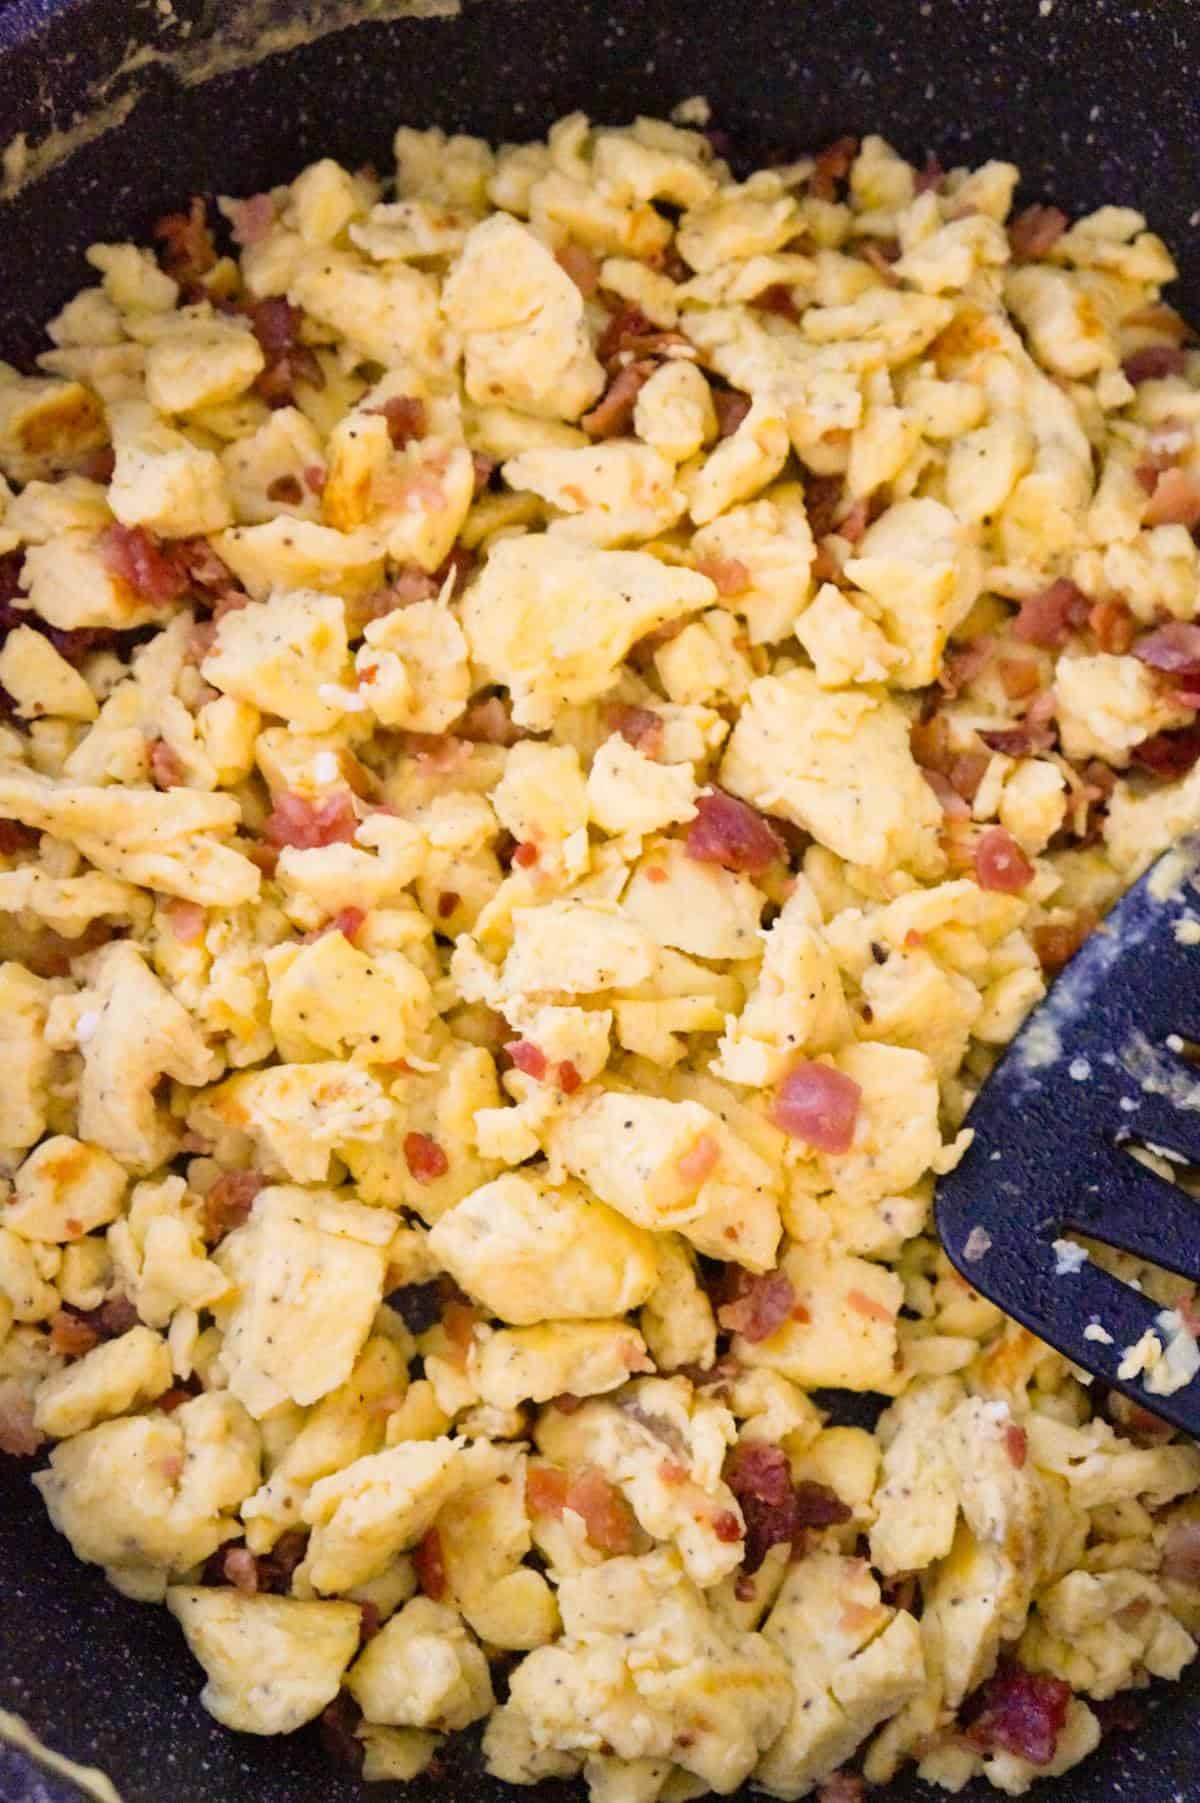 scrambled eggs and crumbled bacon in a saute pan